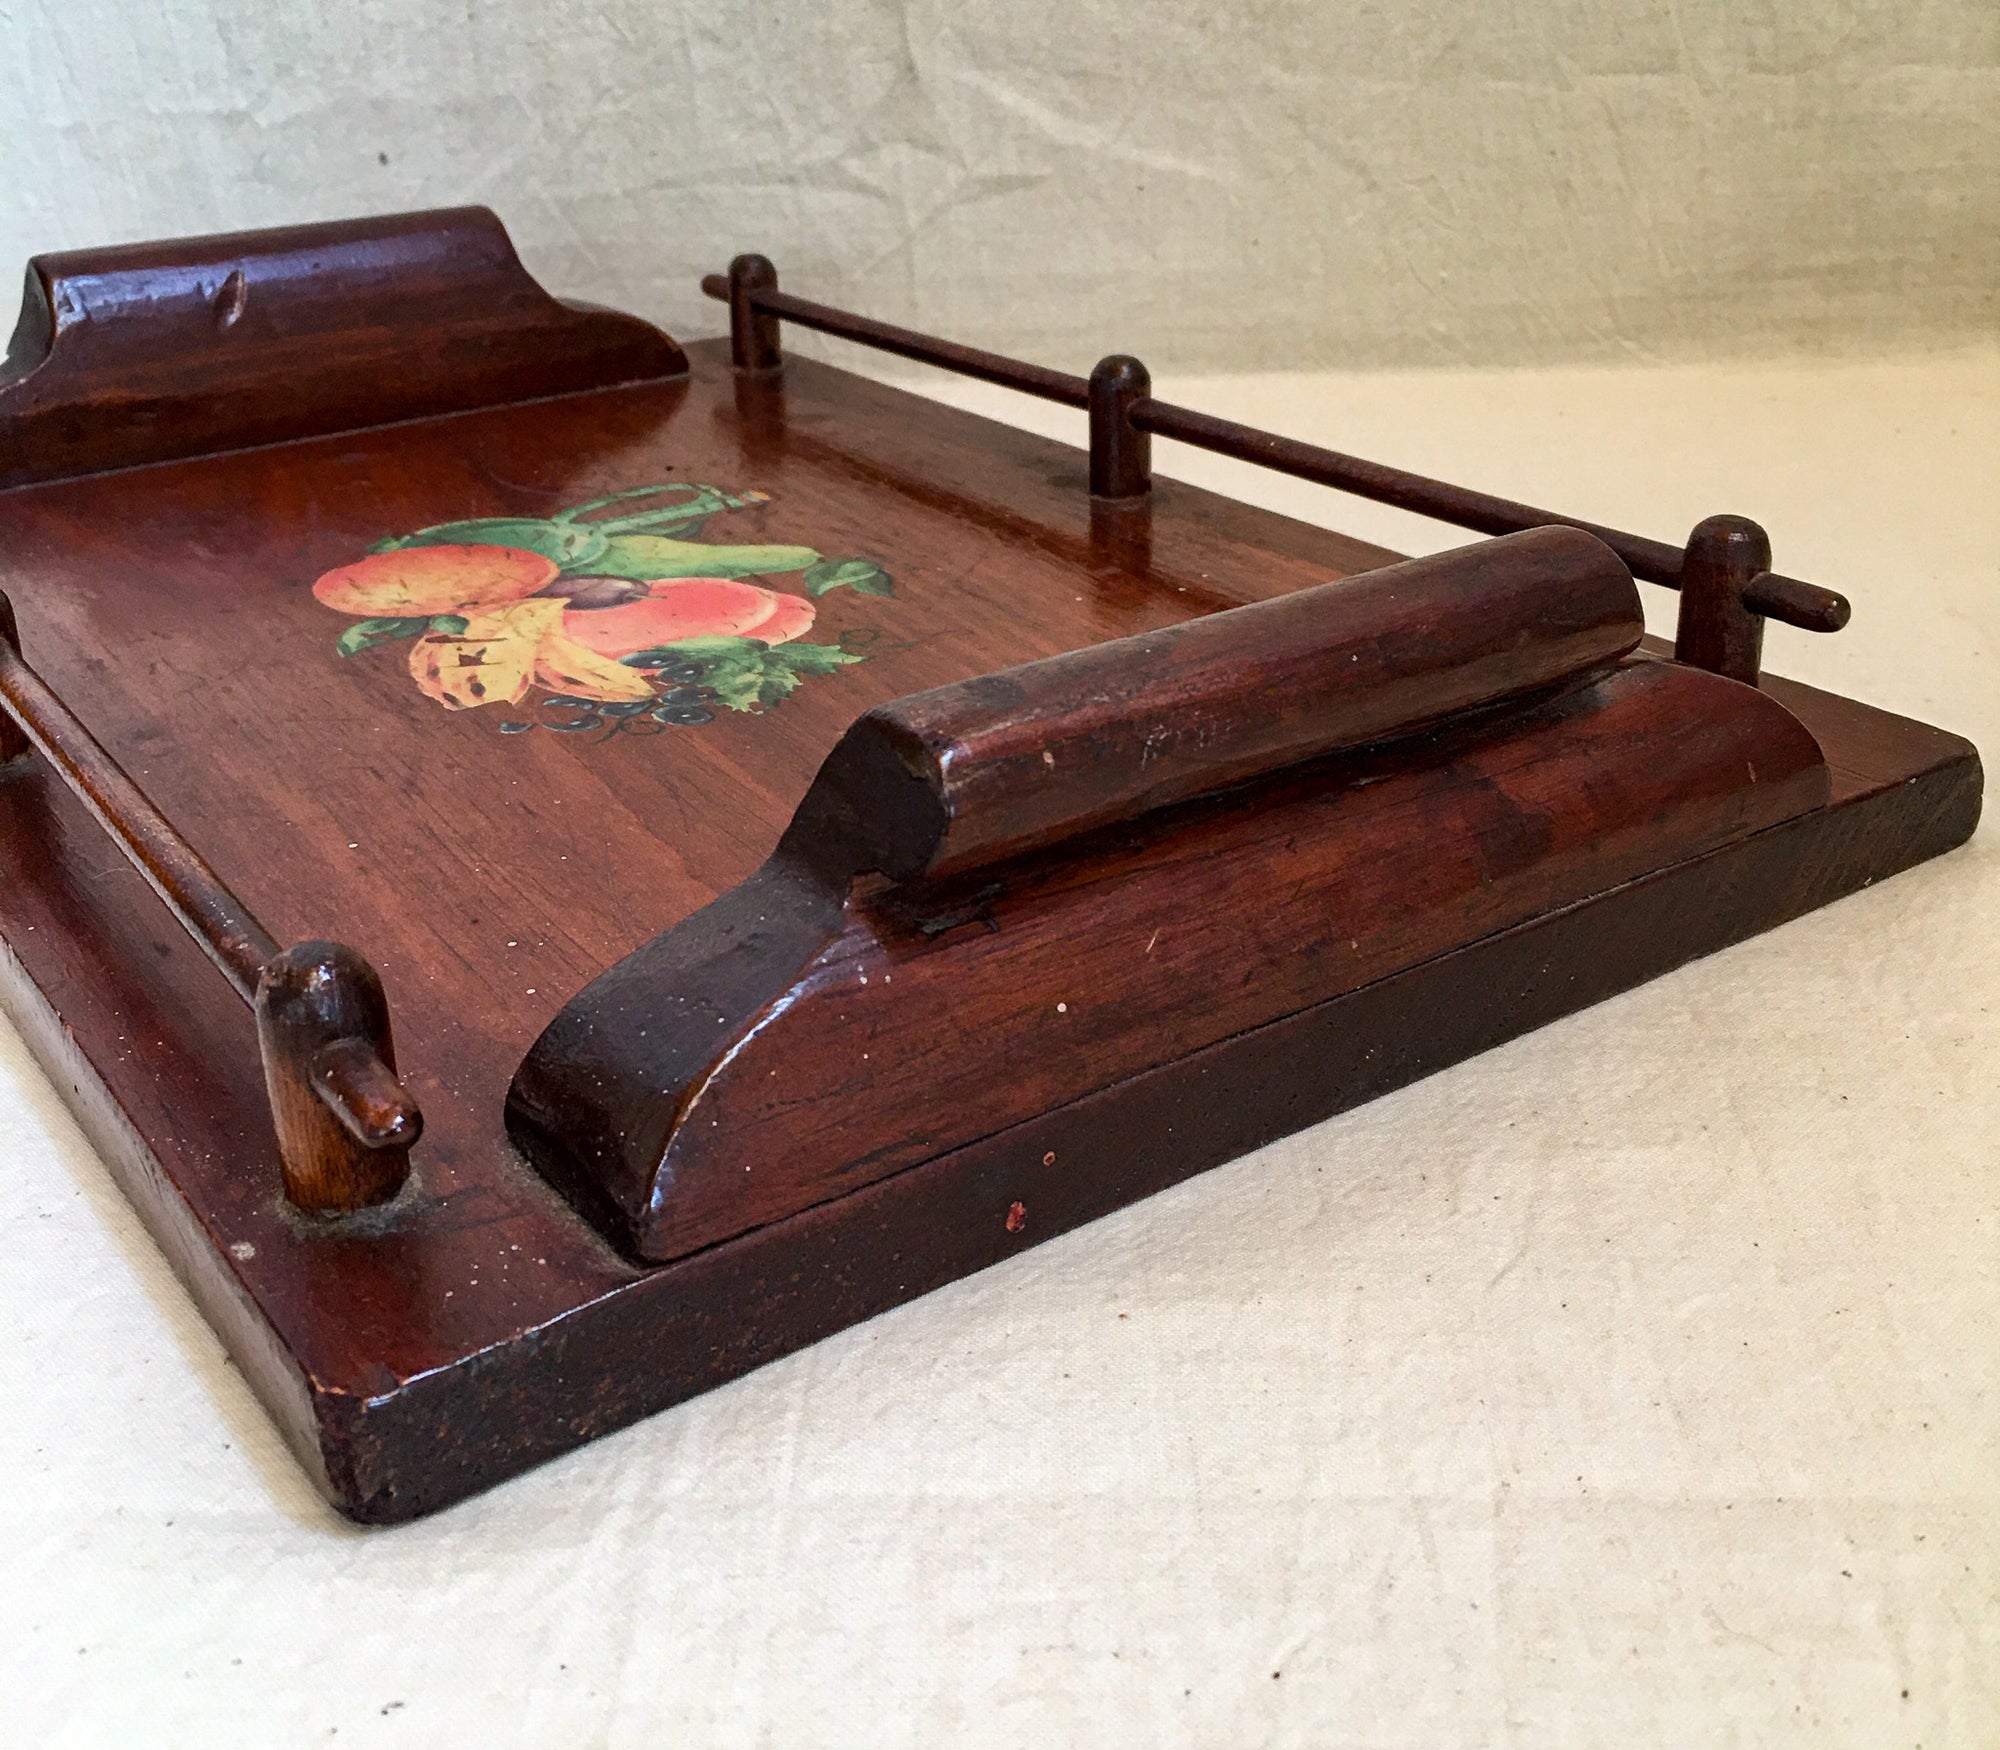 Vintage Hand-Crafted Serving Tray, Signed and Dated 1957